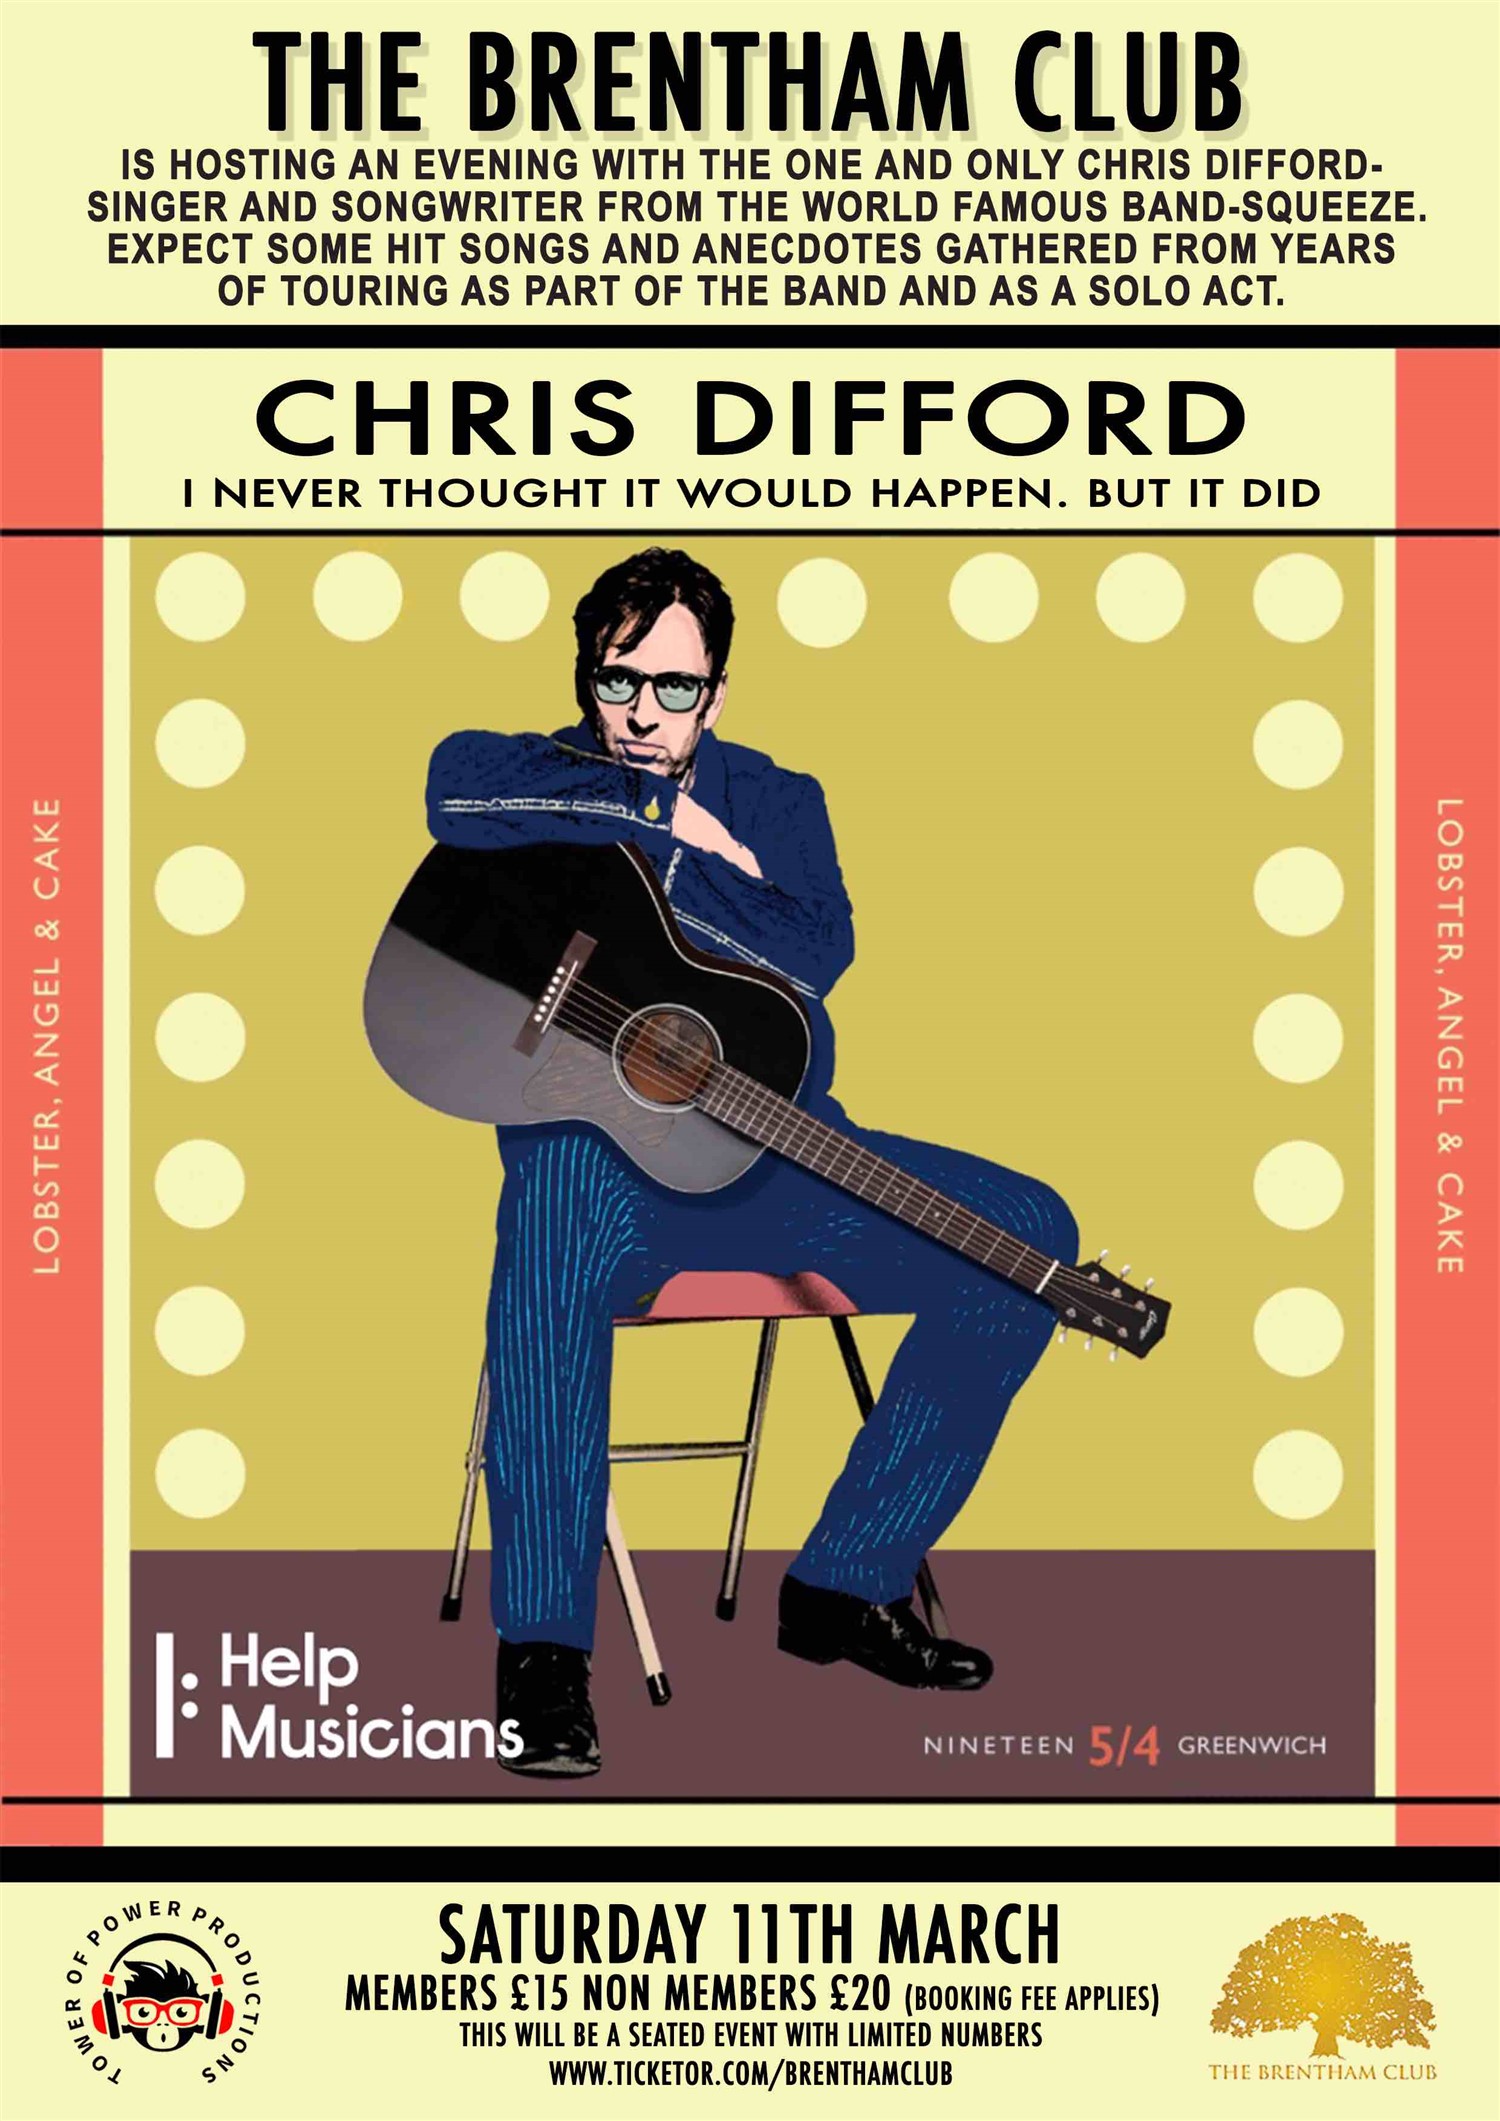 Chris Difford Tickets Go On Sale 25th Jan! Booking fees are applied to each ticket purchase on Mar 11, 20:00@The Brentham Club - Buy tickets and Get information on Brenthamclub.co.uk 